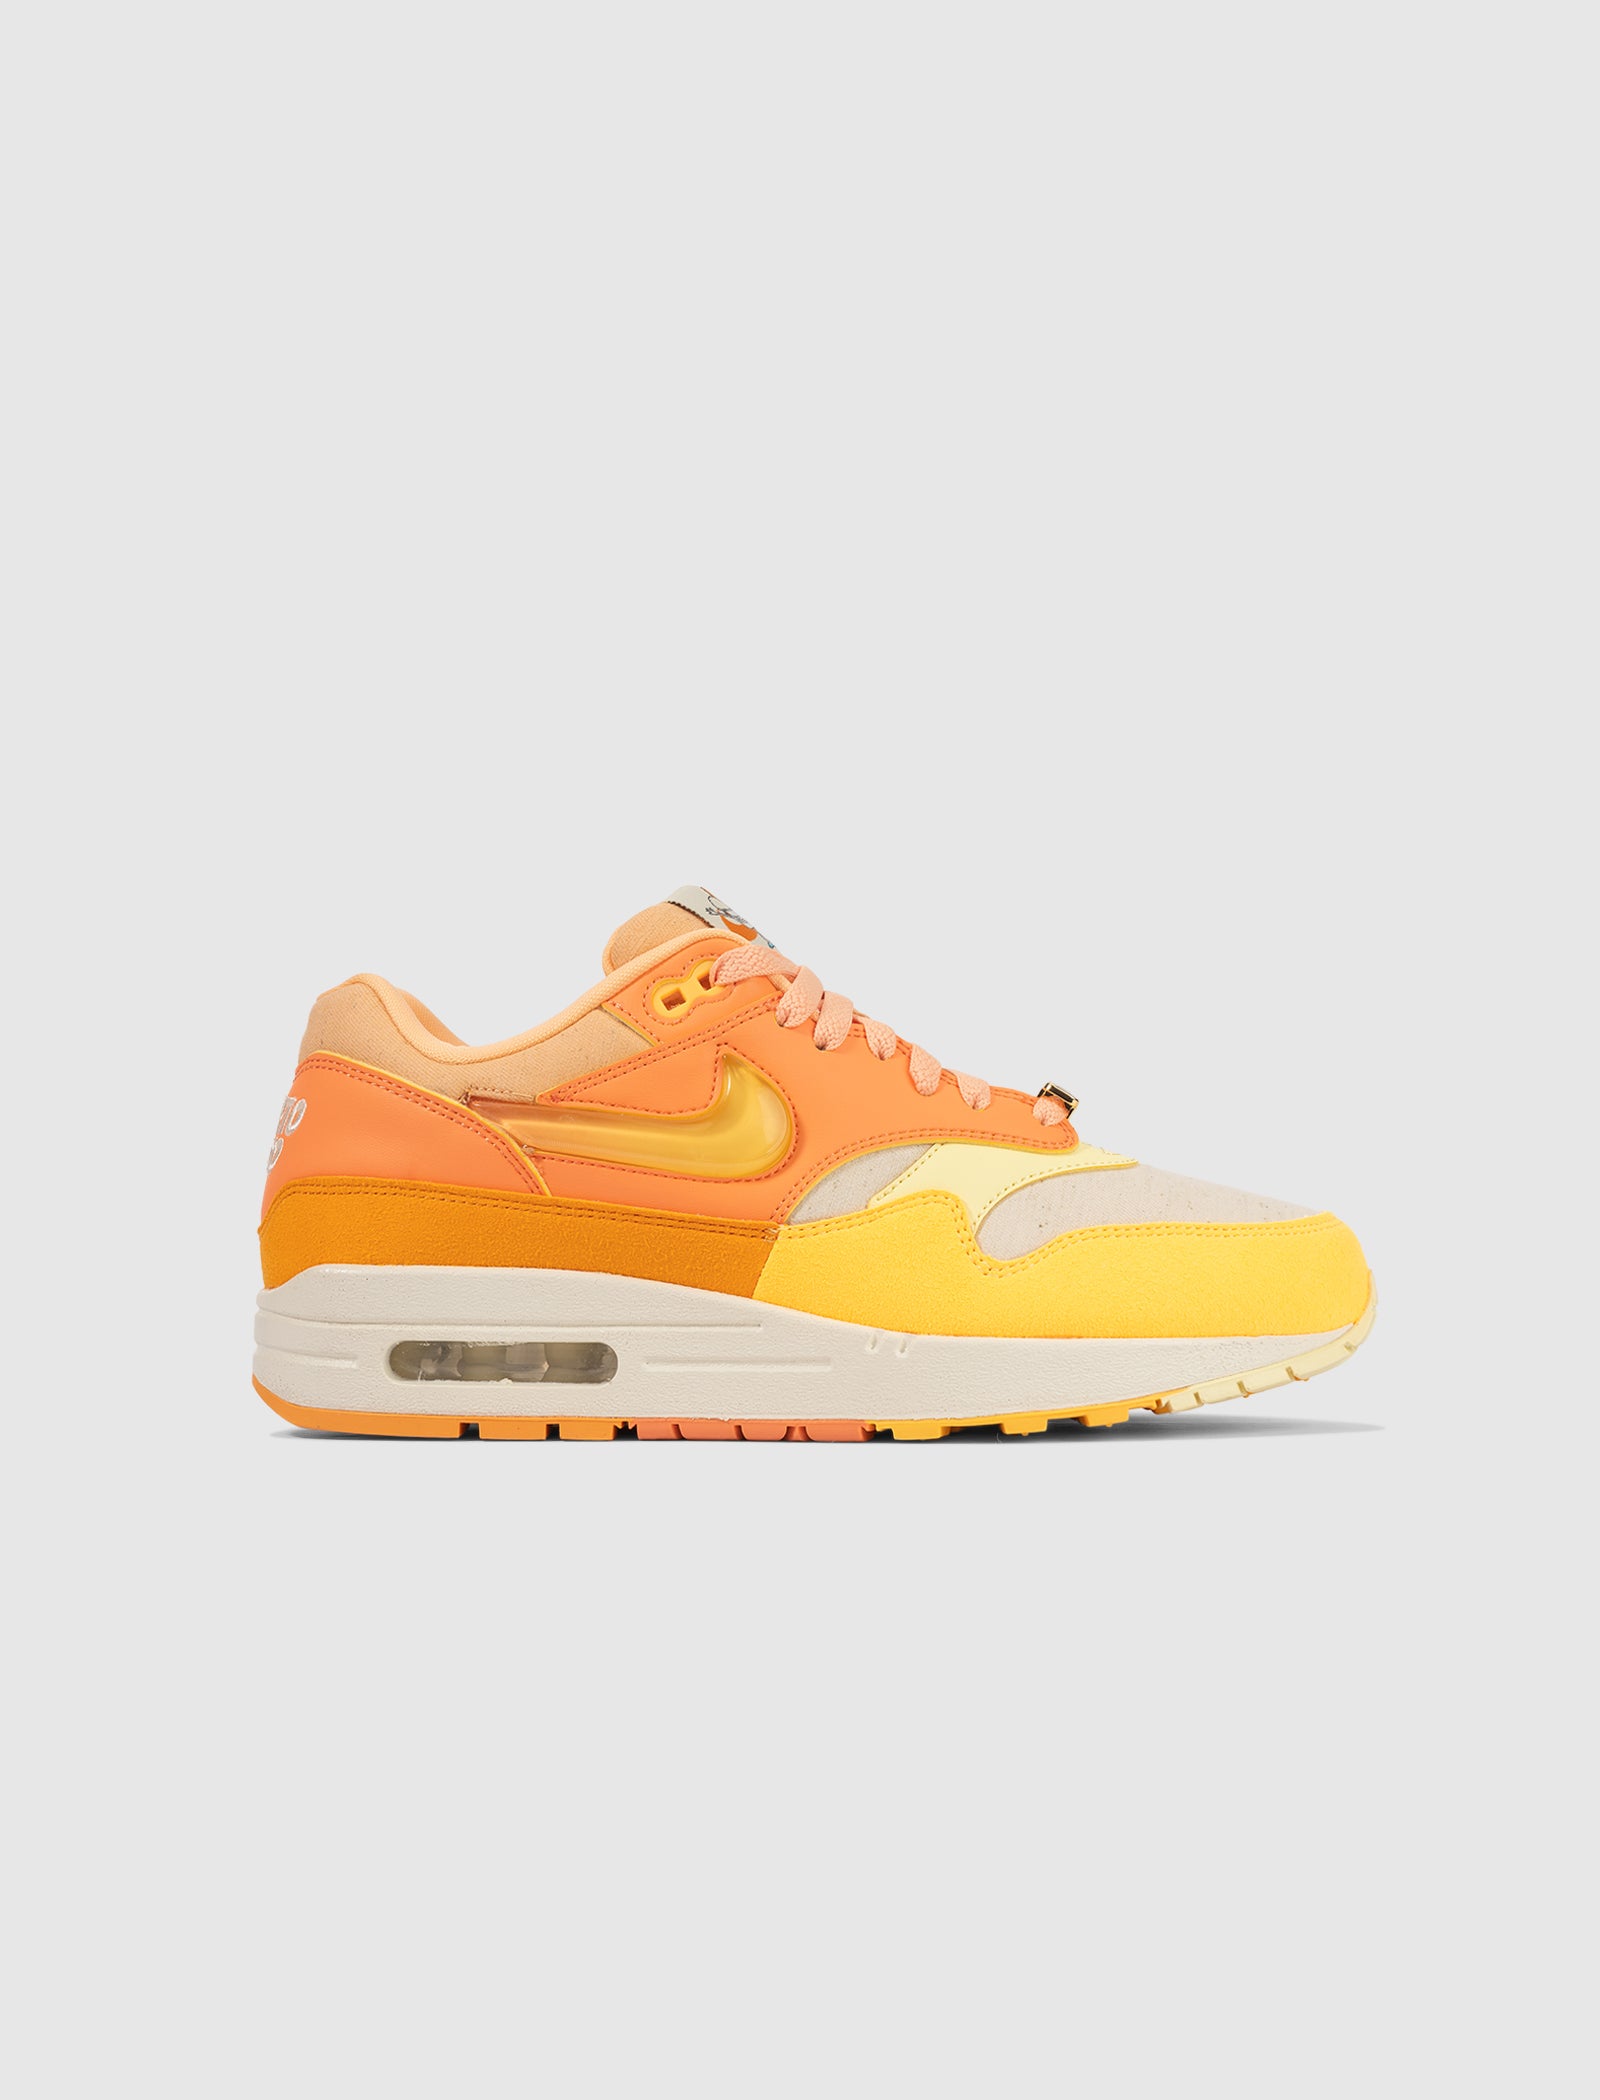 AIR MAX 1 PUERTO RICO DAY "ORANGE FROST"